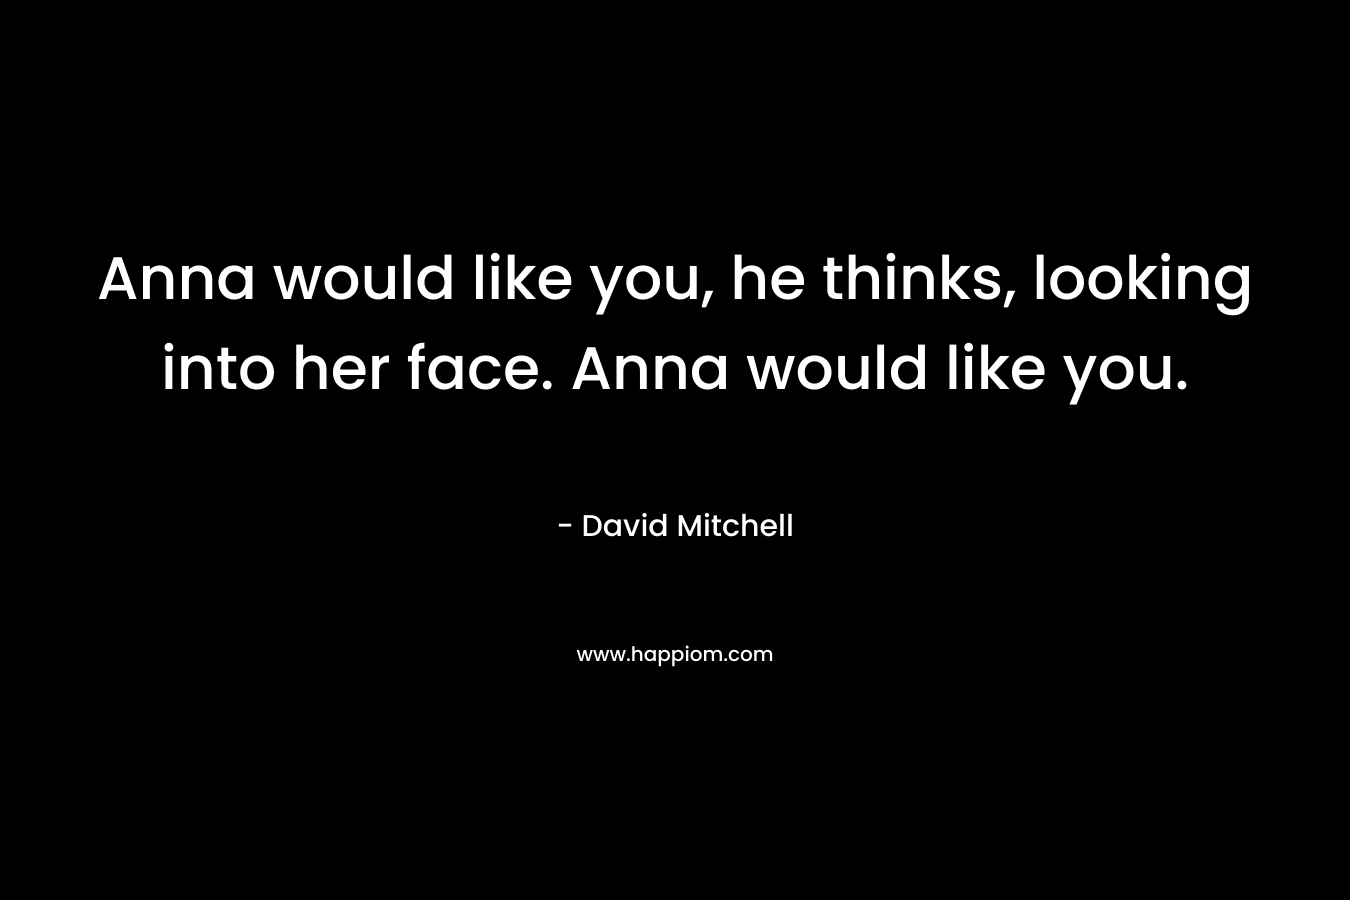 Anna would like you, he thinks, looking into her face. Anna would like you. – David Mitchell